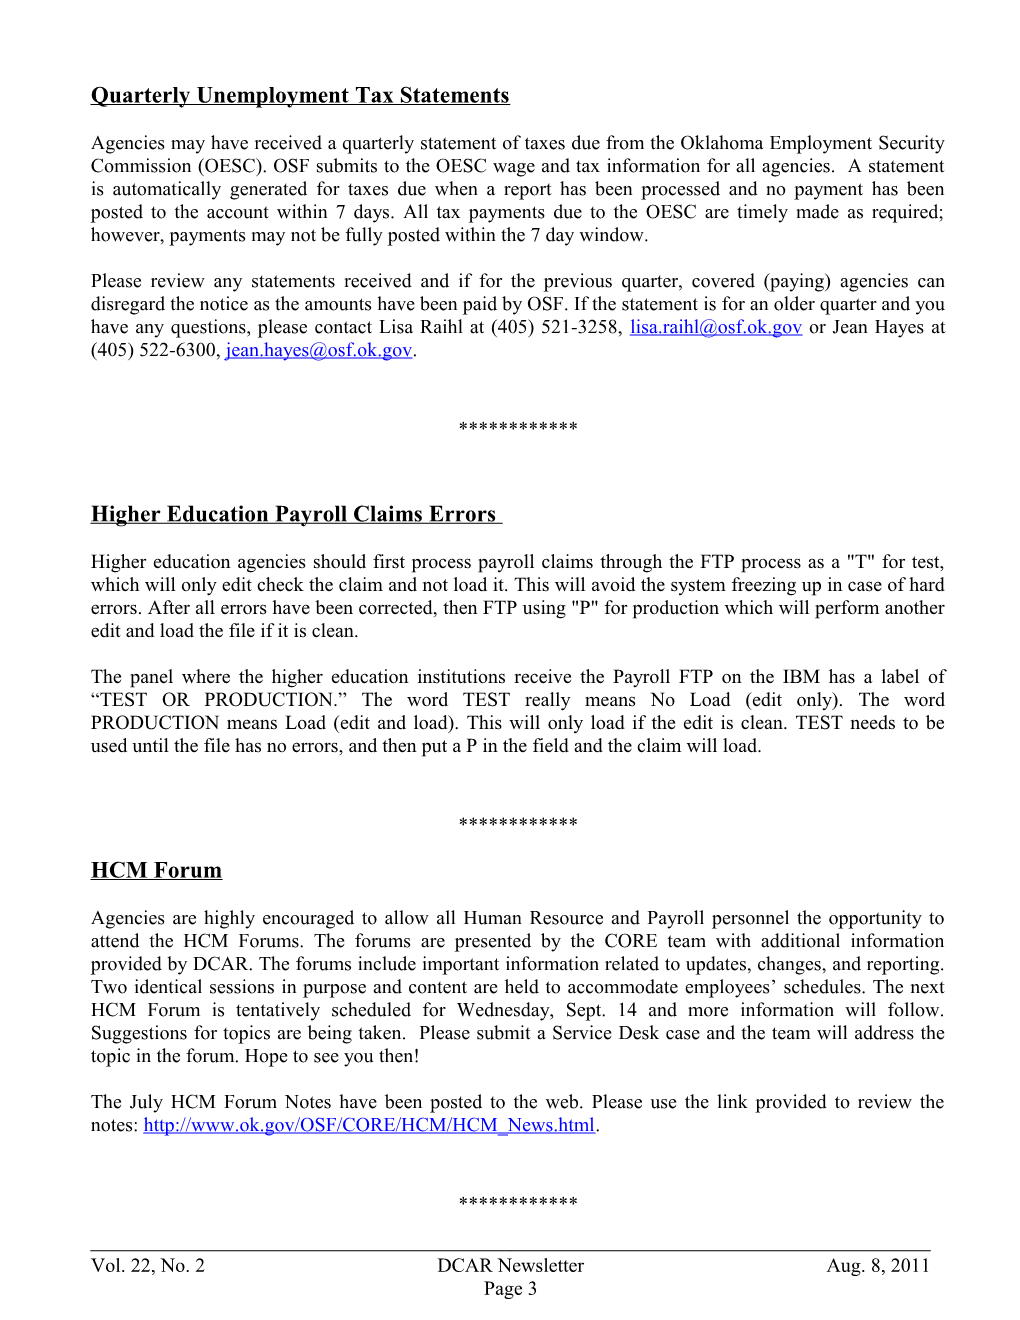 Office of State Finance DCAR Newsletter, Aug. 8, 2011